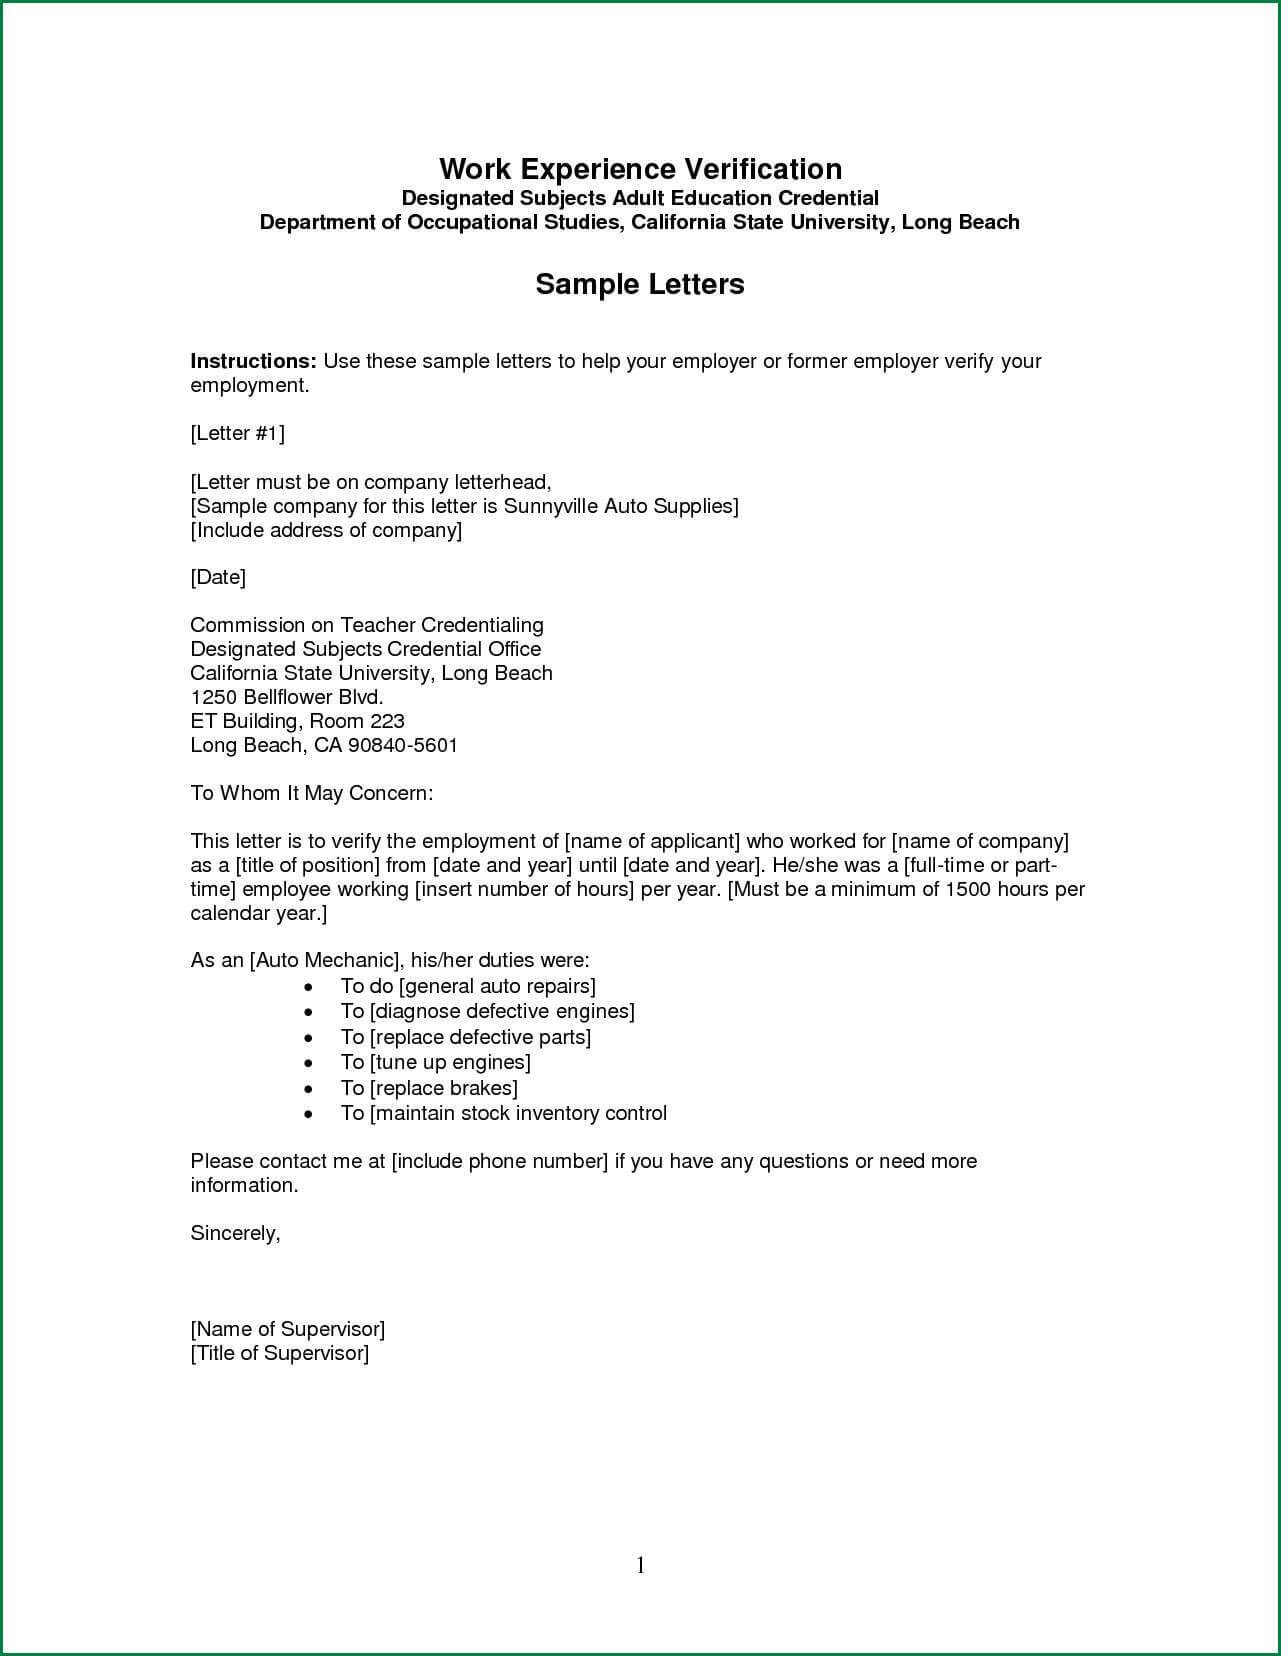 News Report Template Free Business Letter Pdf New Ks1 Pertaining To News Report Template